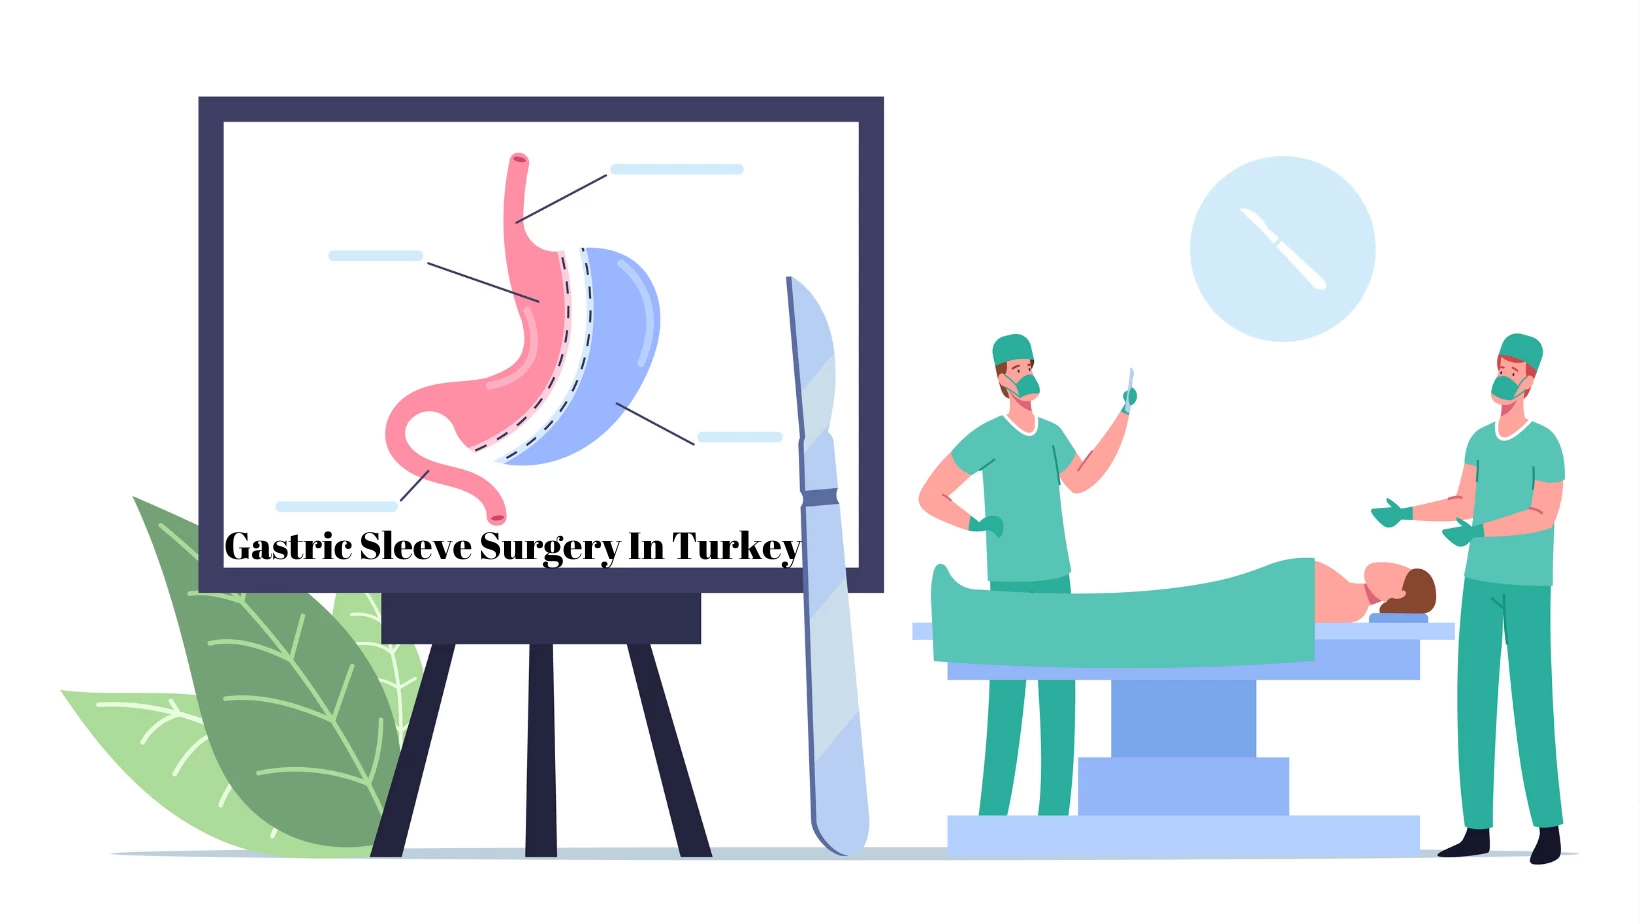 Gastric sleeve surgery in Turkey (Tube Stomach Surgery)